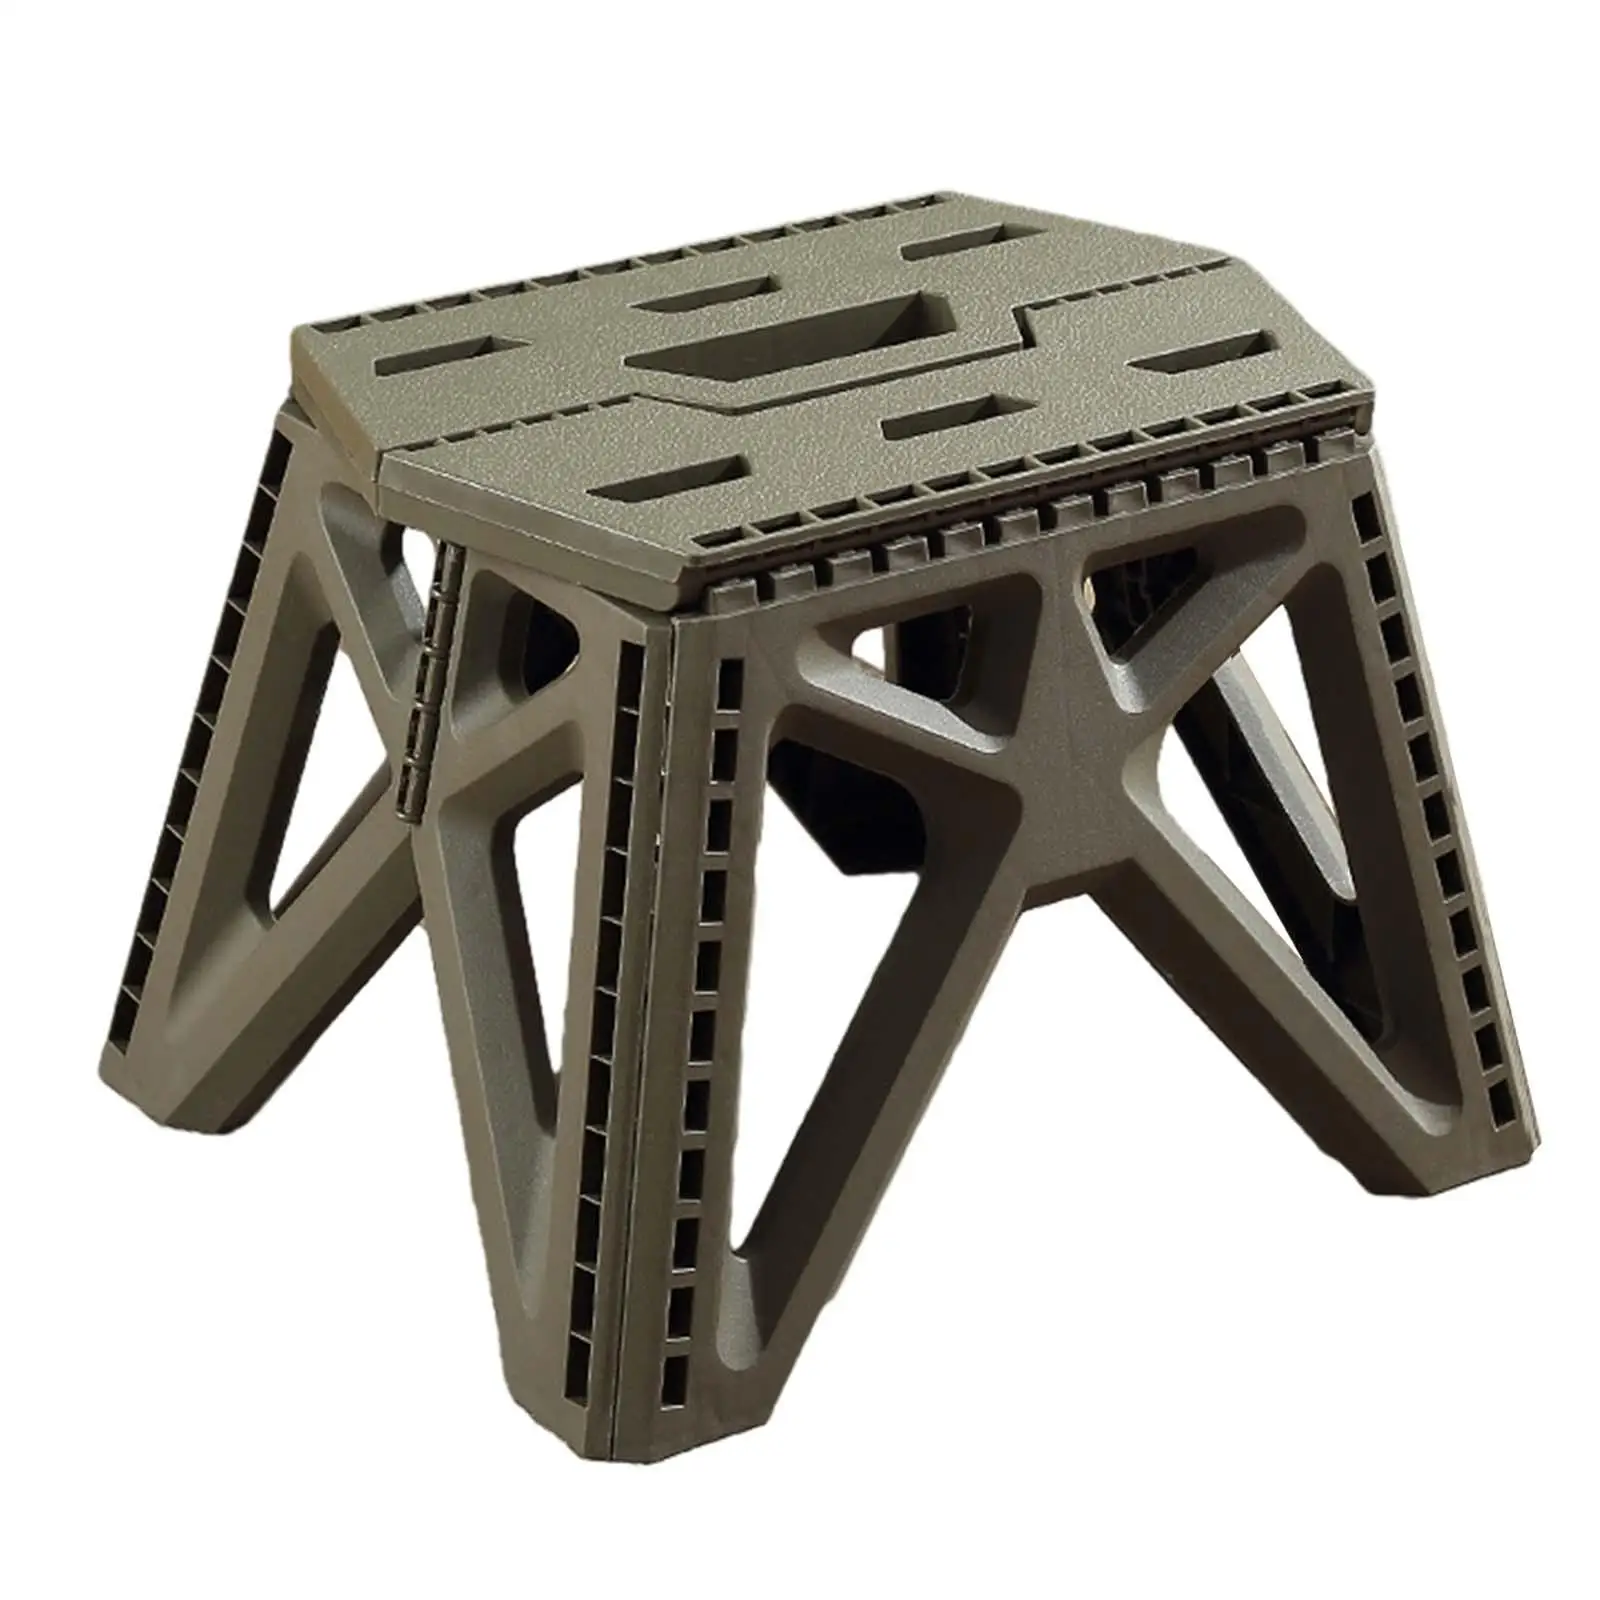 Foldable Camping Stool Portable Collapsible Lightweight Outside Camp Stool Chair